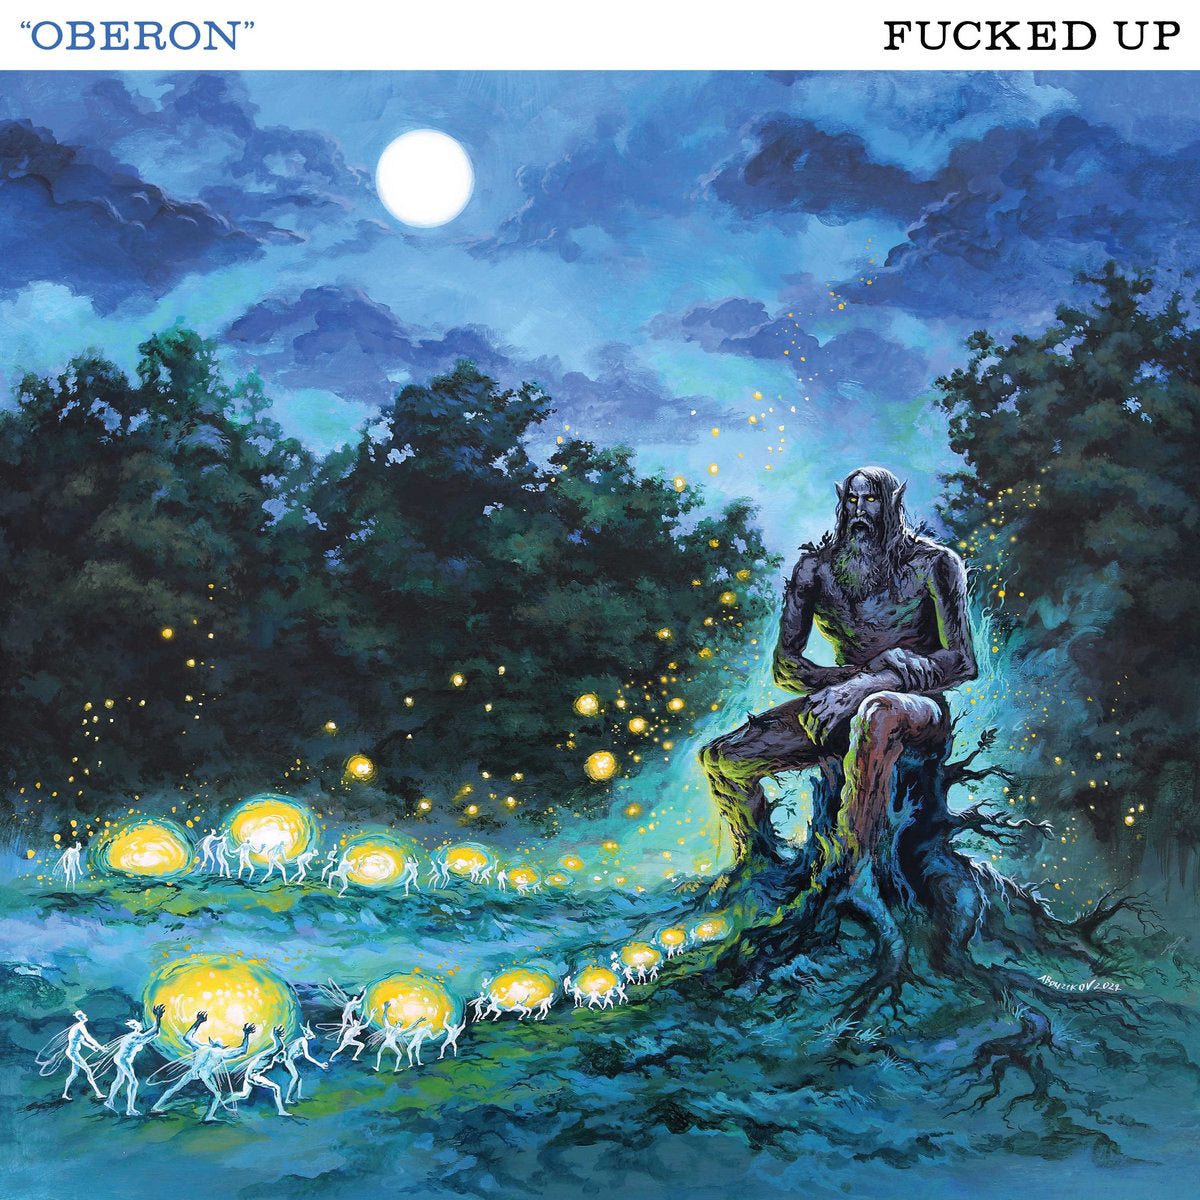 Fucked Up - "Oberon" 12-Inch